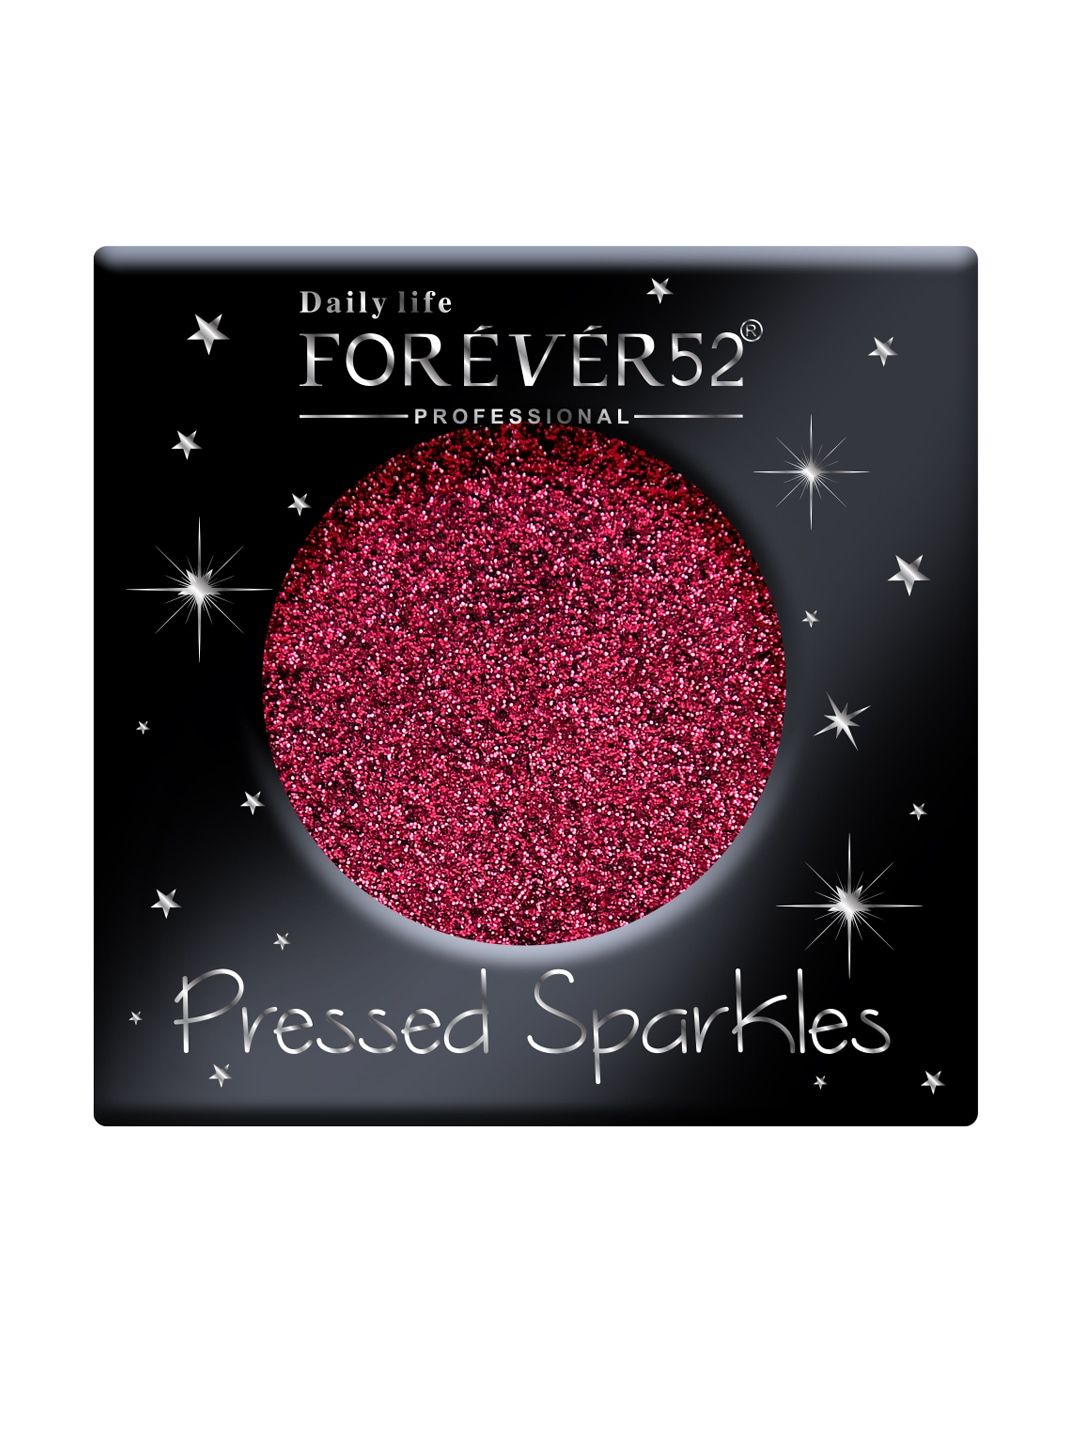 Daily Life Forever52 Pressed Sparkles Stunner PS018 Eyeshadow 3g Price in India